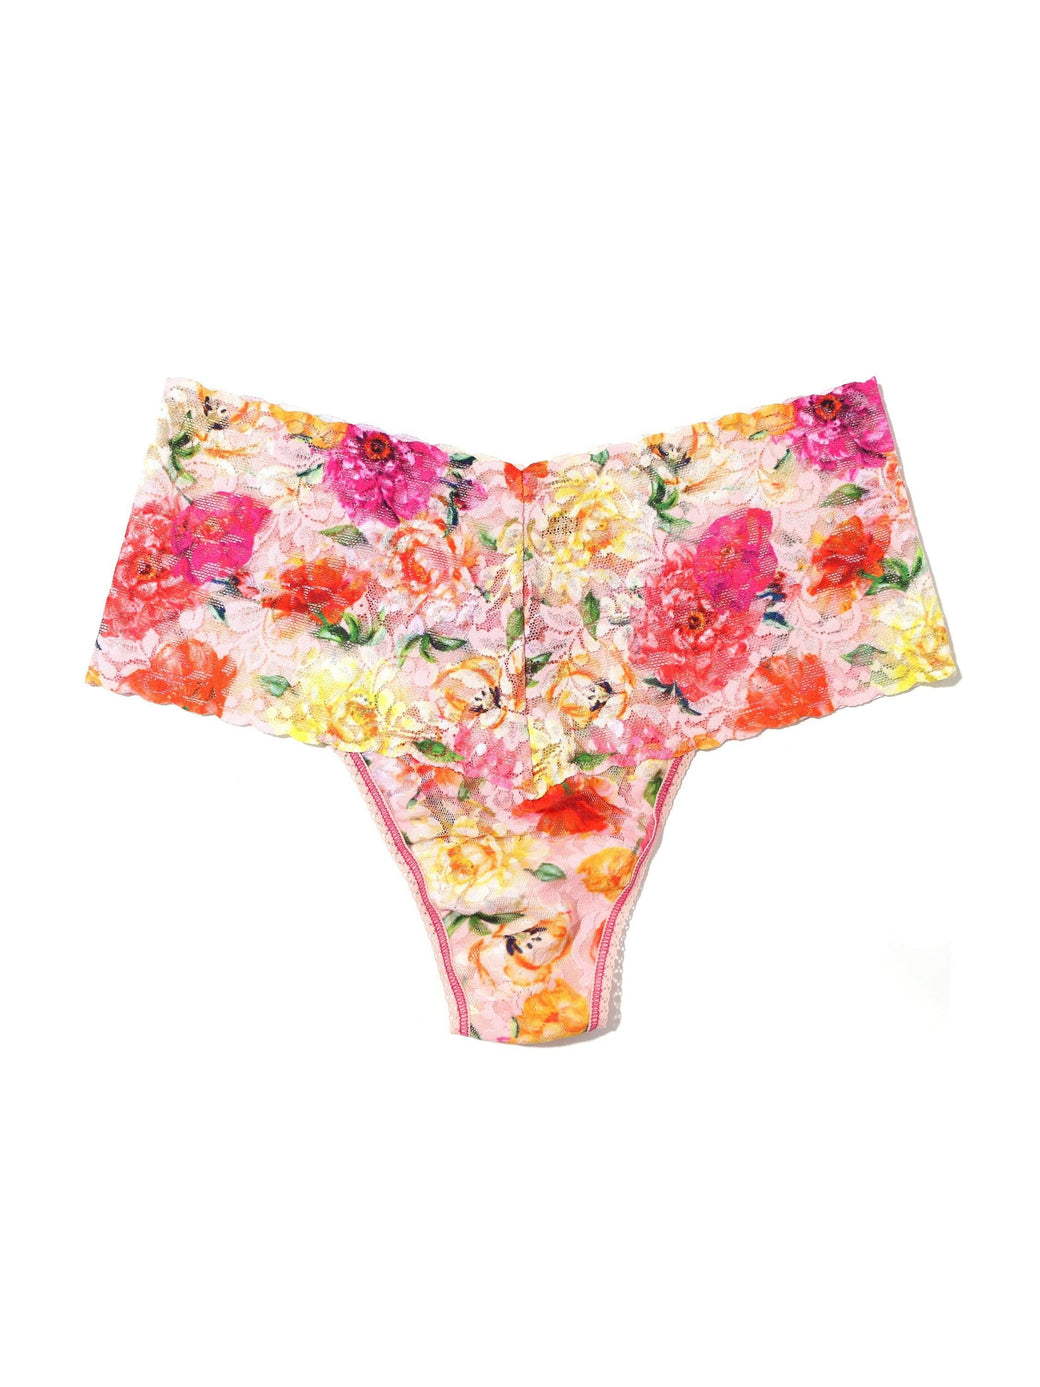 Printed Retro Lace Thong Bring Me Flowers Sale